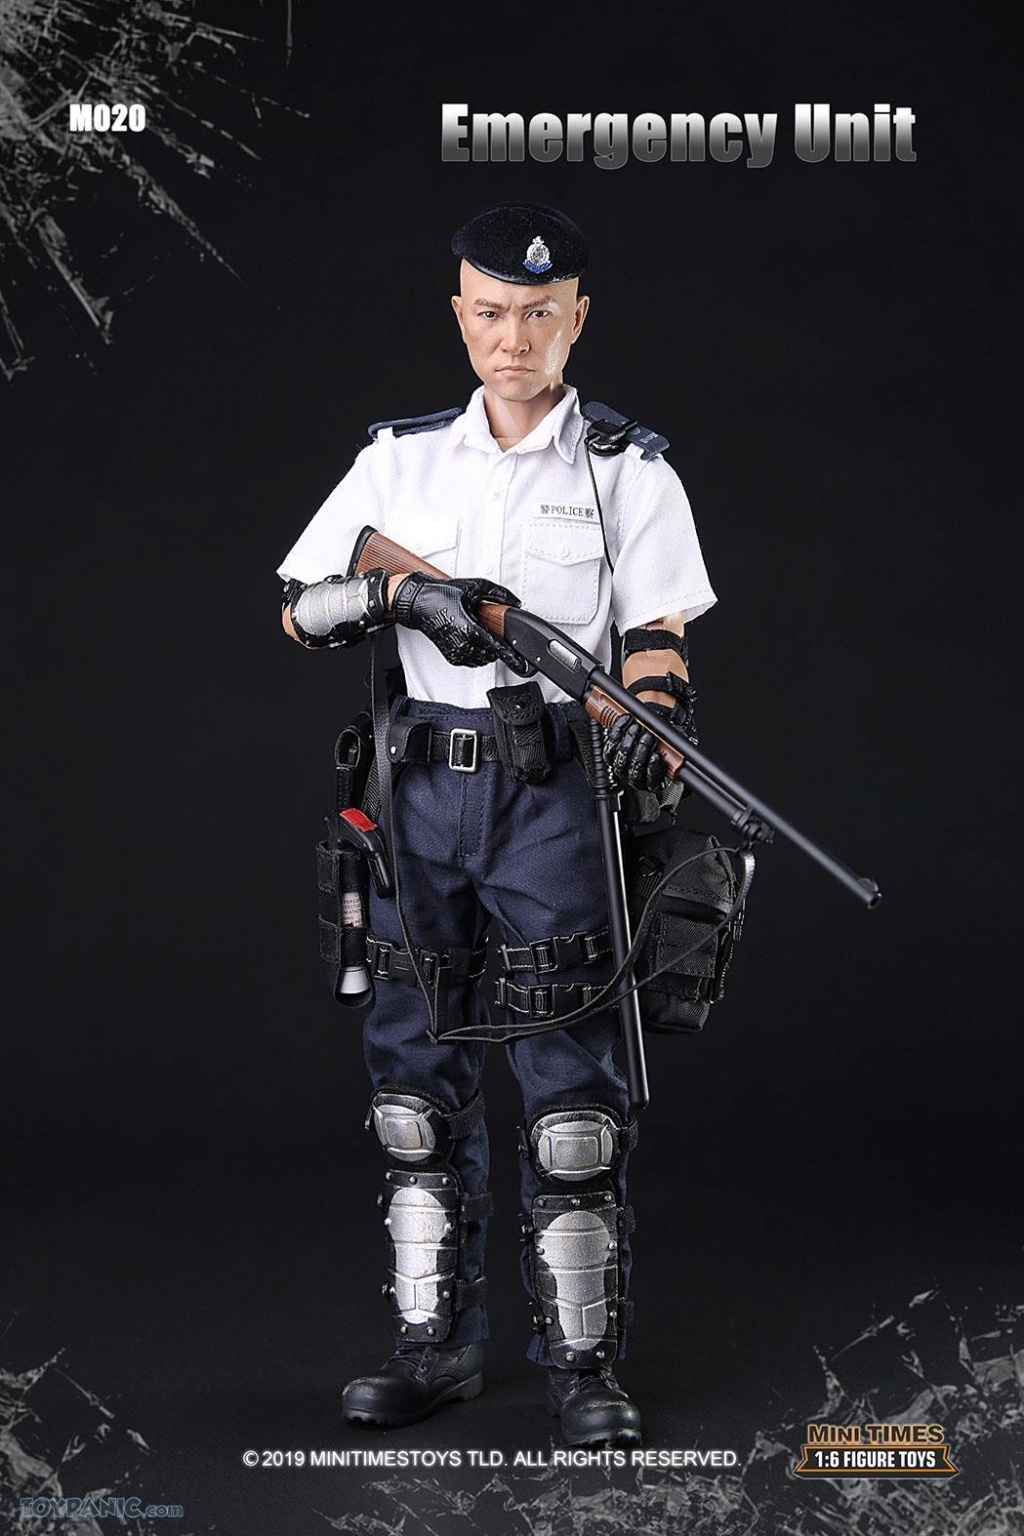 HongKongPolice - NEW PRODUCT: 1/6 scale Hong Kong Police Action Figure From Mini Times Toys Code: MT-M020 10302028